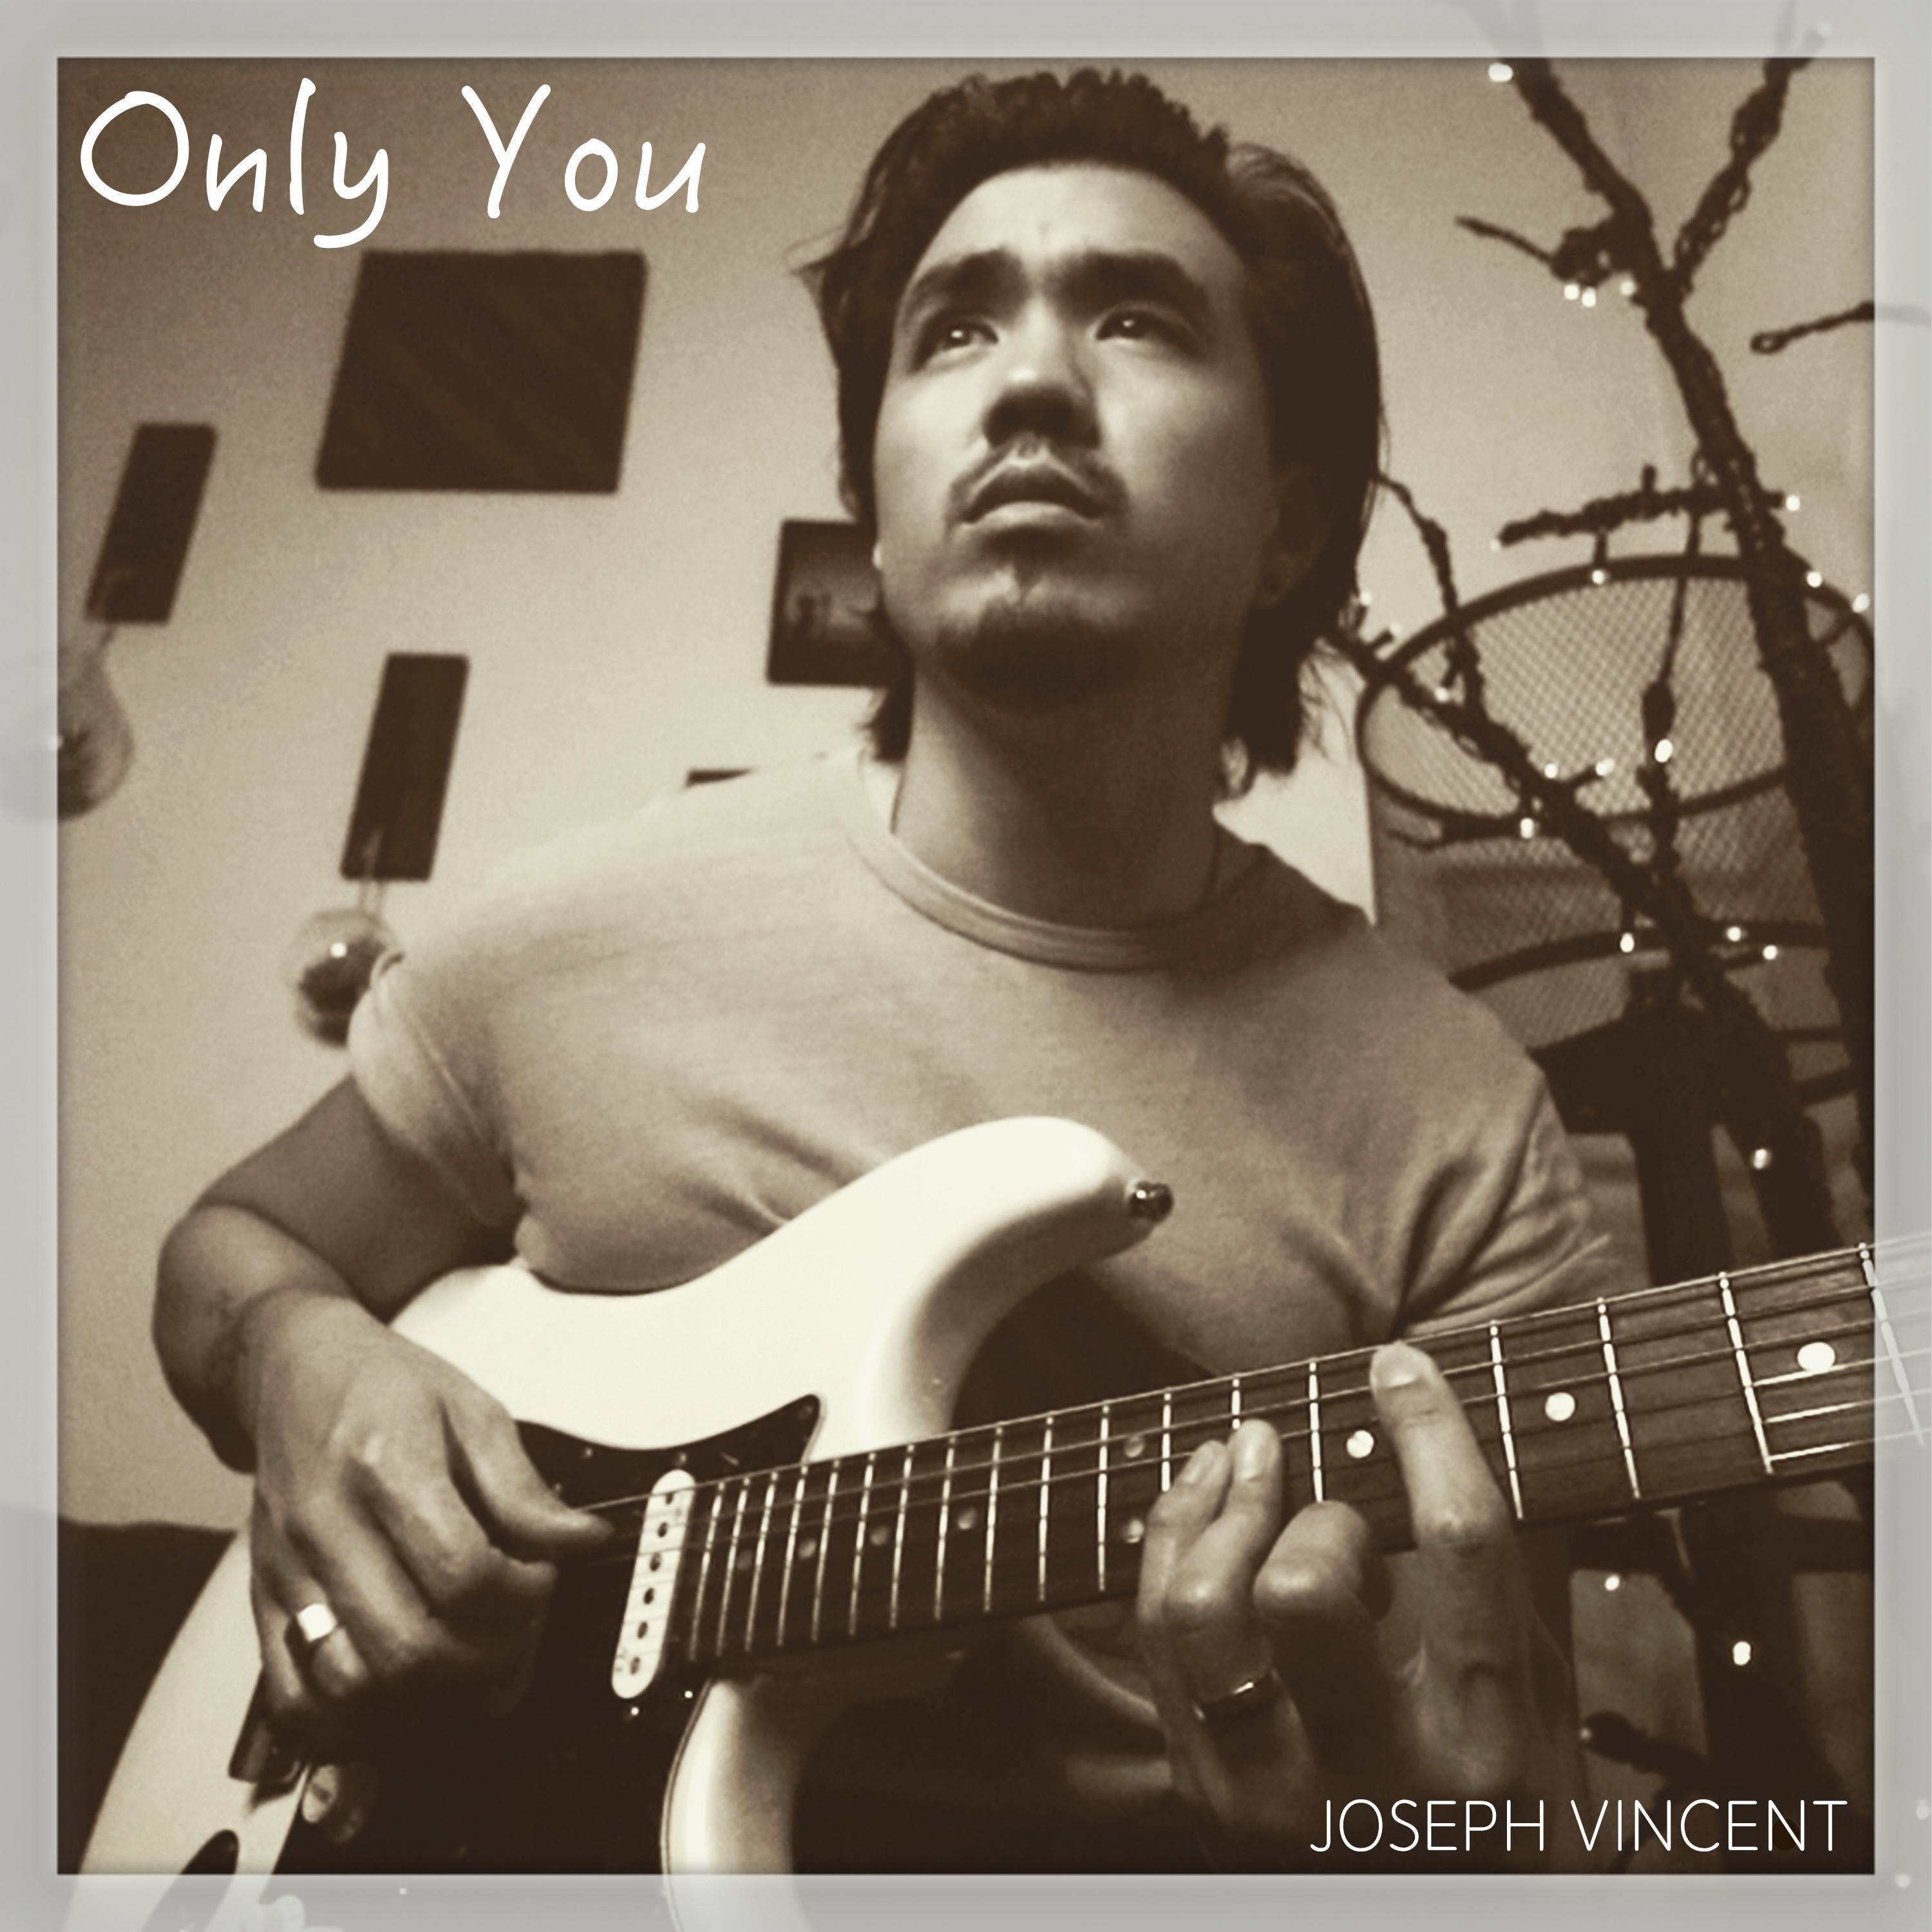 Joseph Vincent - Only You